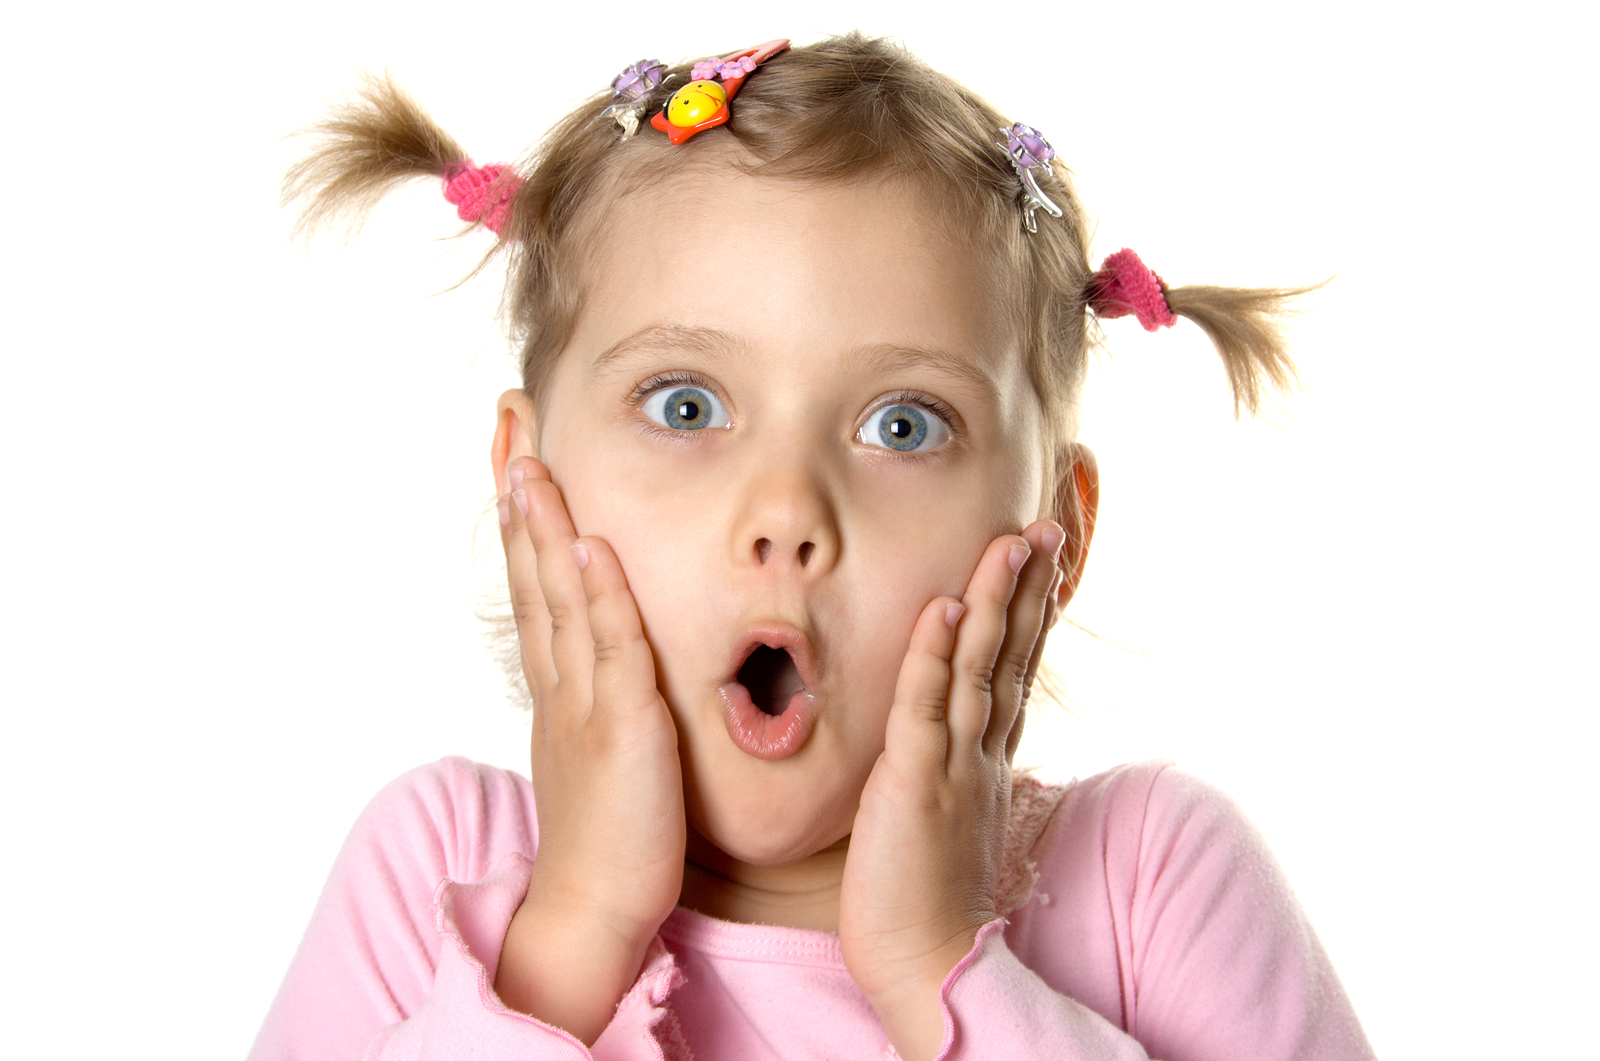 little girl surprised at a depleted ppc budget.